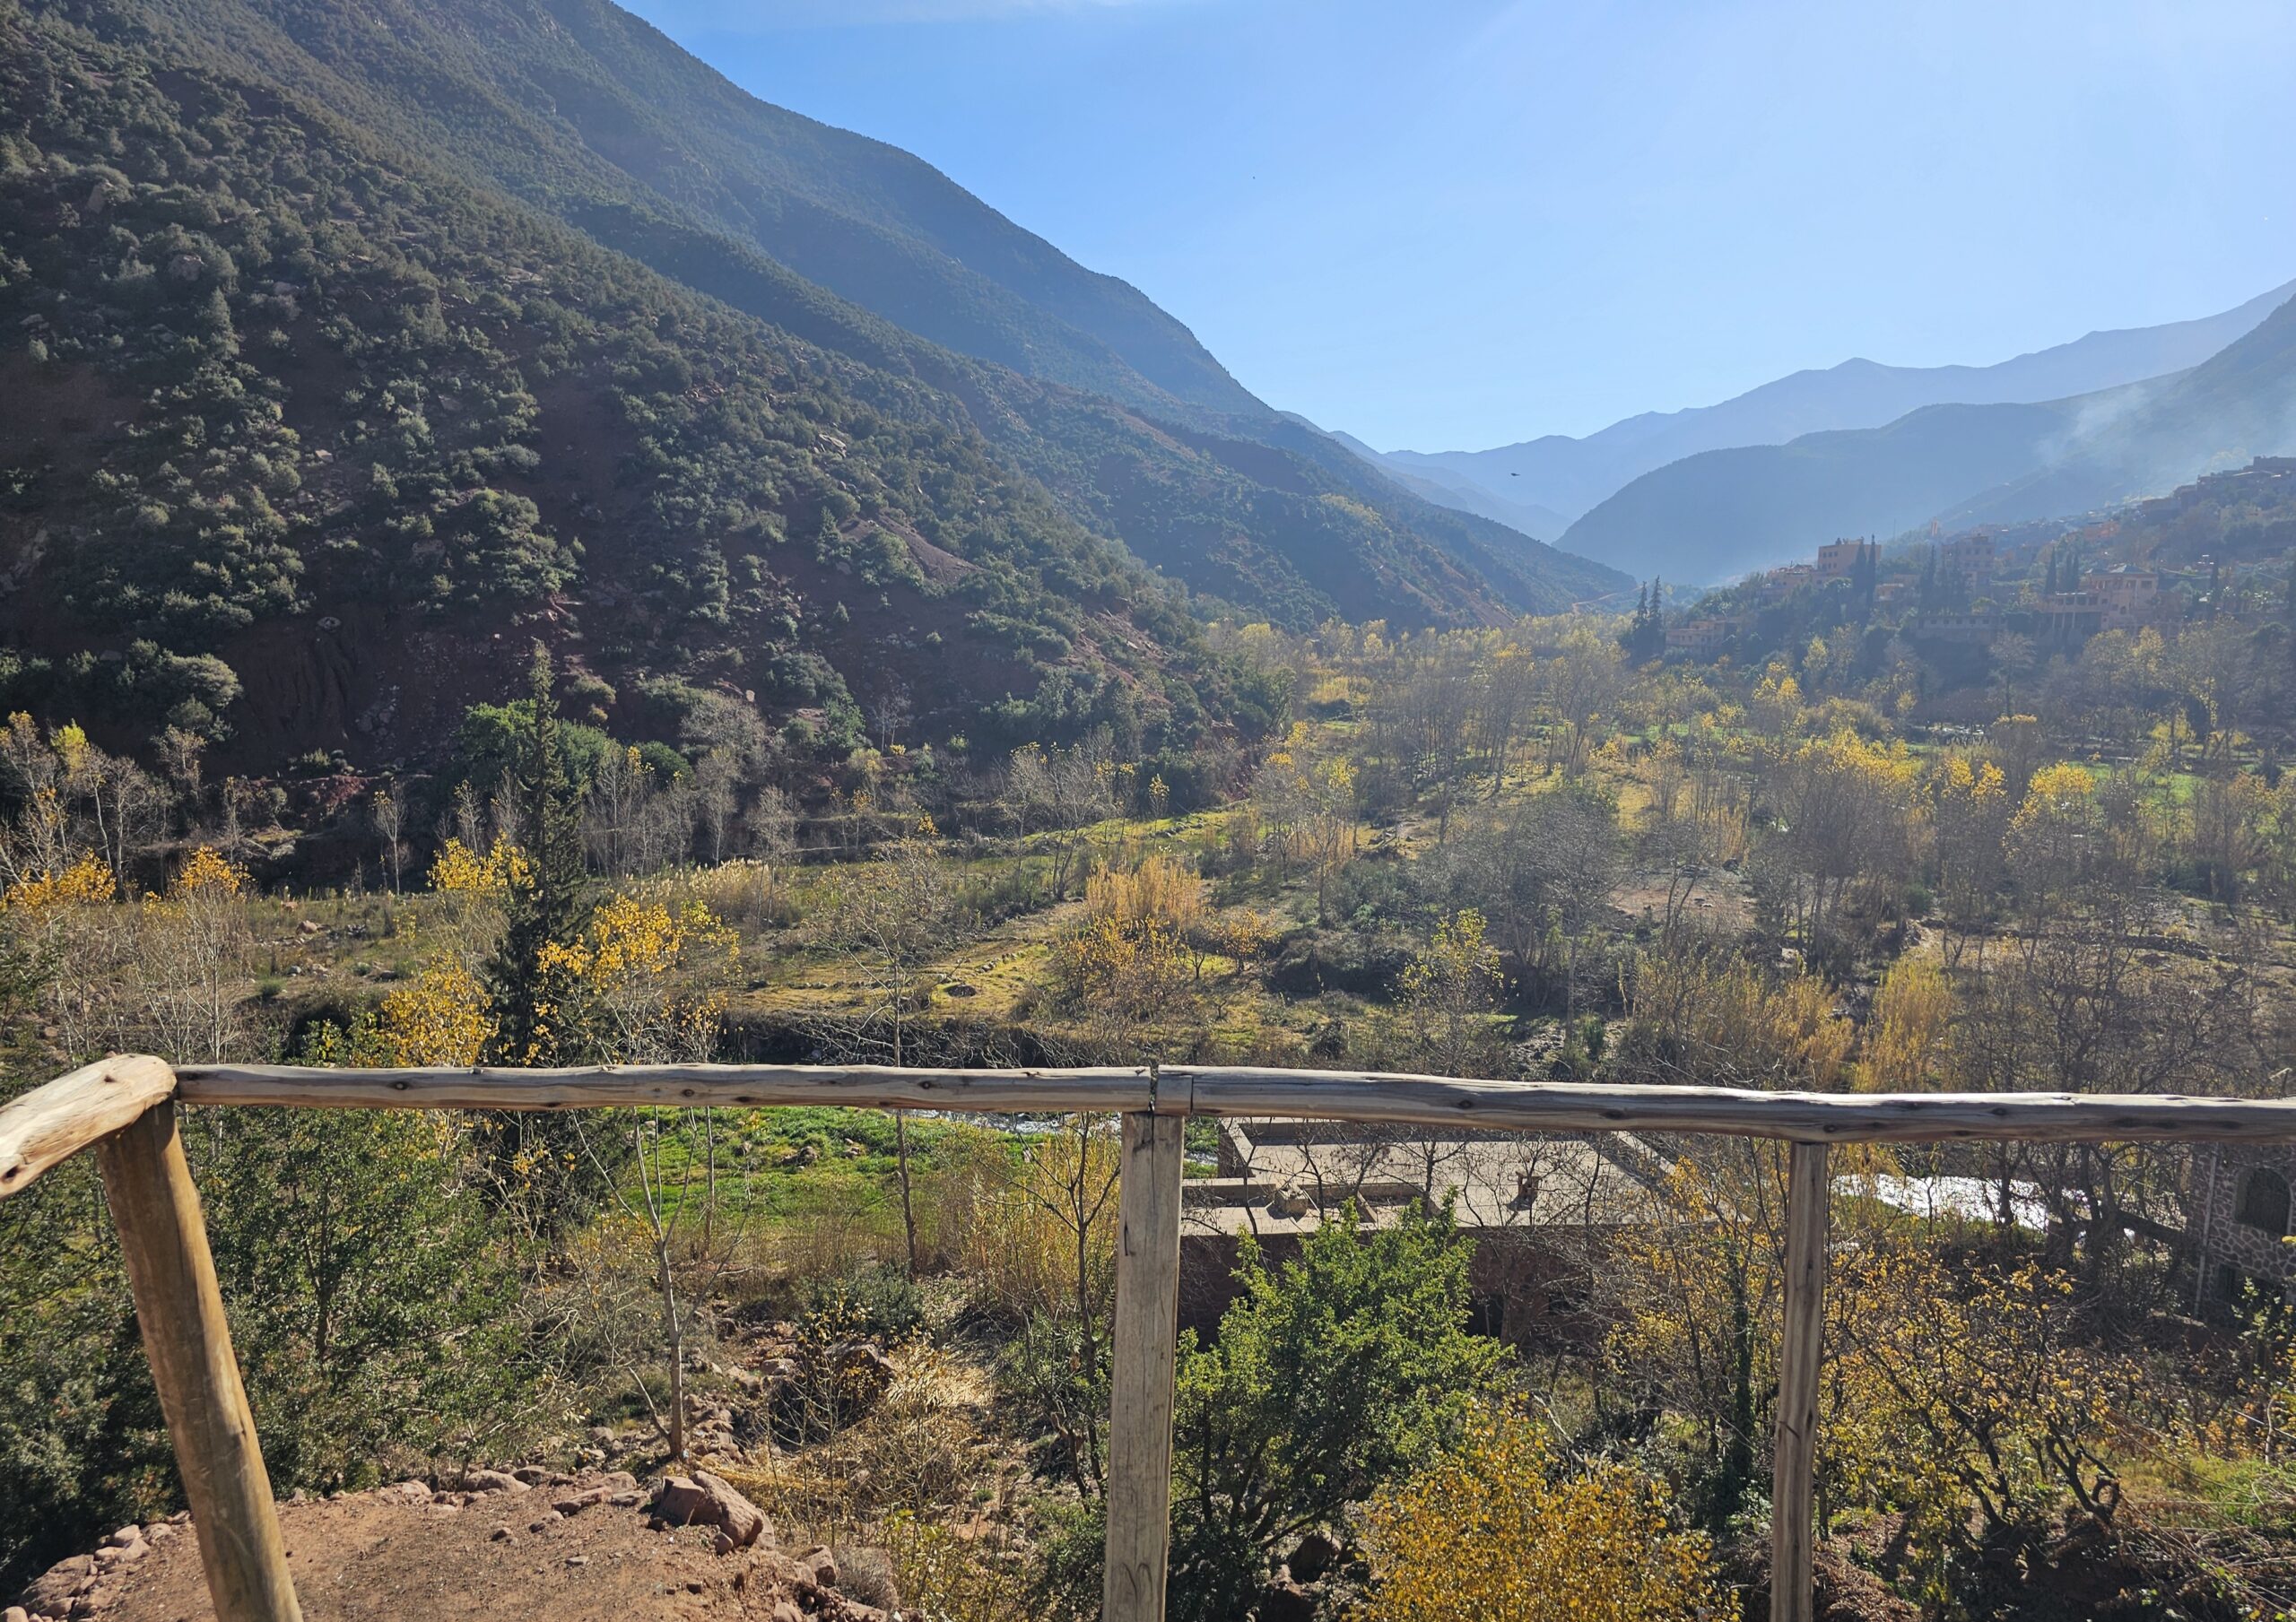 A view of Atlas Mountains in Ourika Valley, near Marrakesh. Image by 360onhistory.com